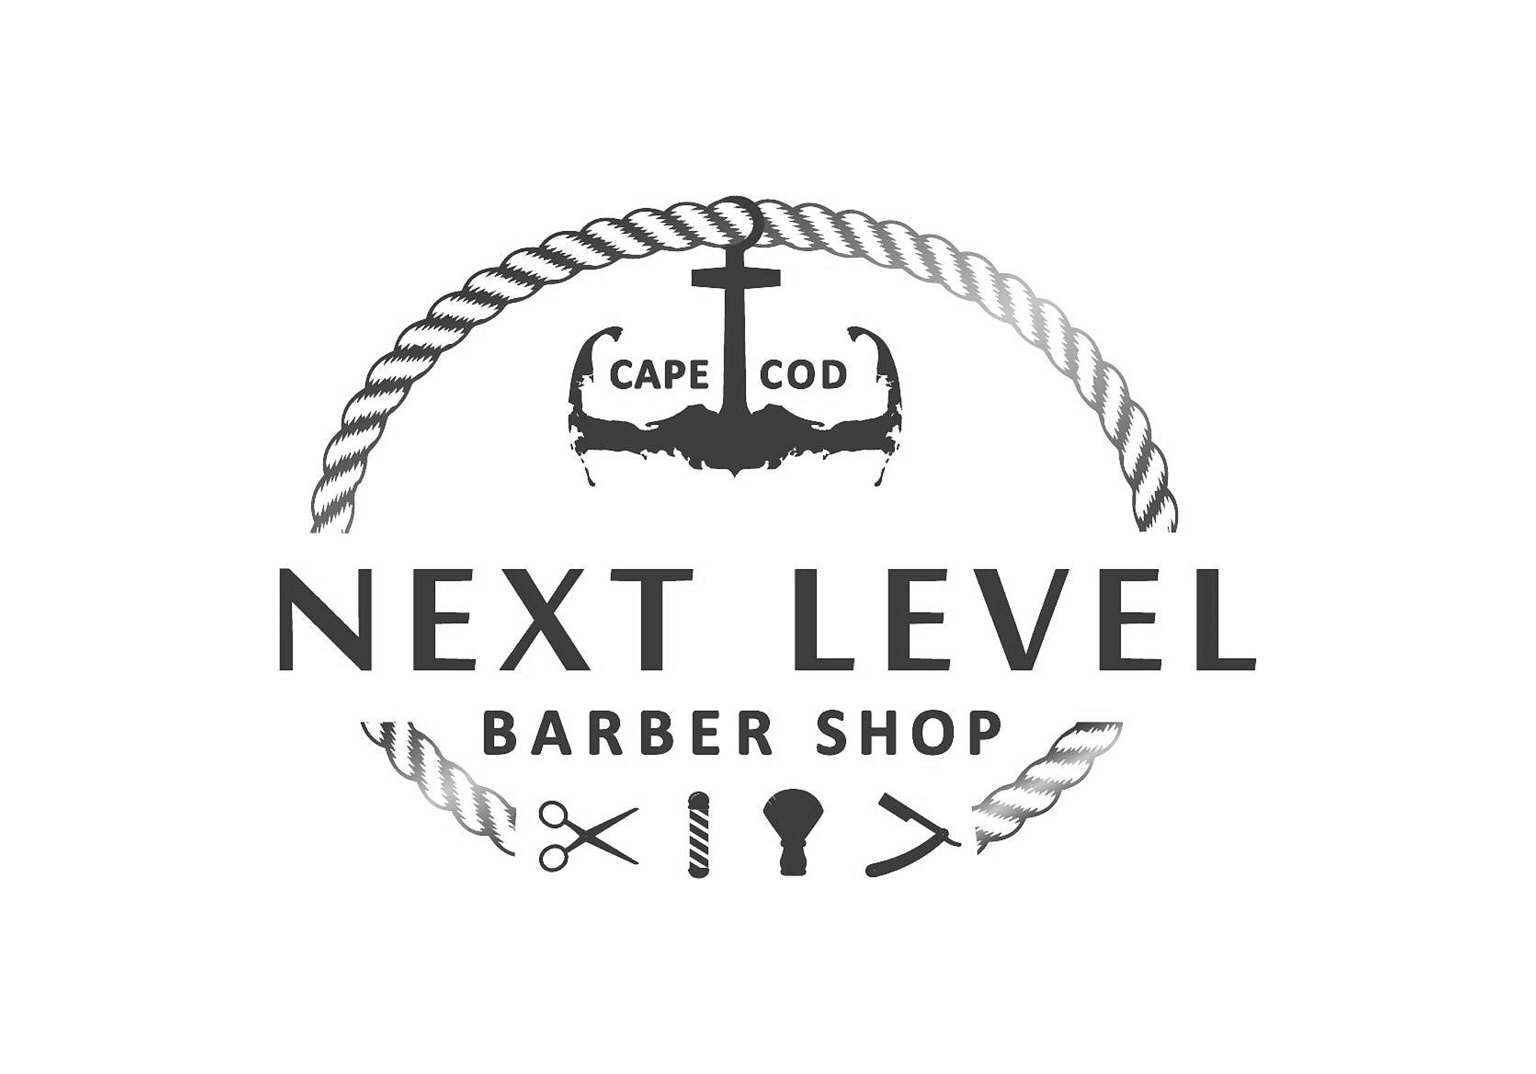 Next Level Barber Shop Cape Cod In Chatham MA